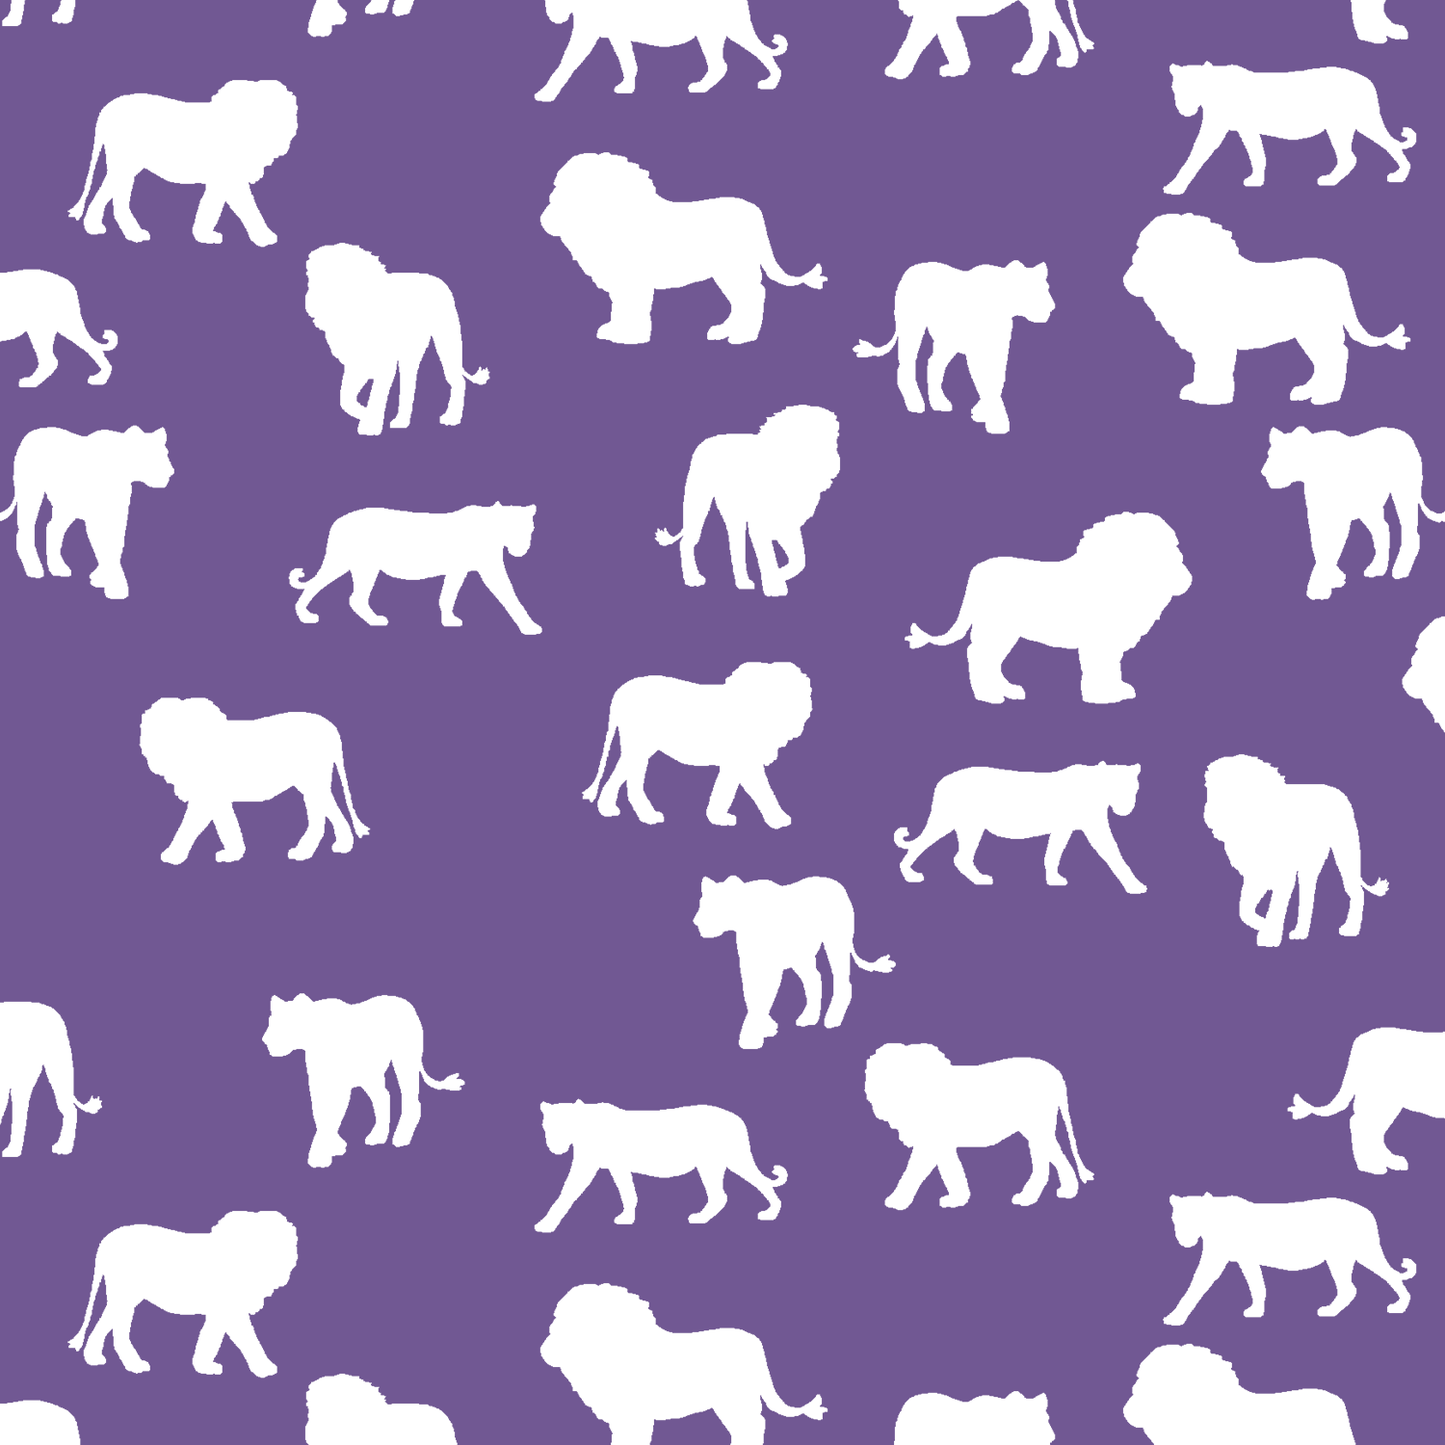 Lion Silhouette in Ultra Violet